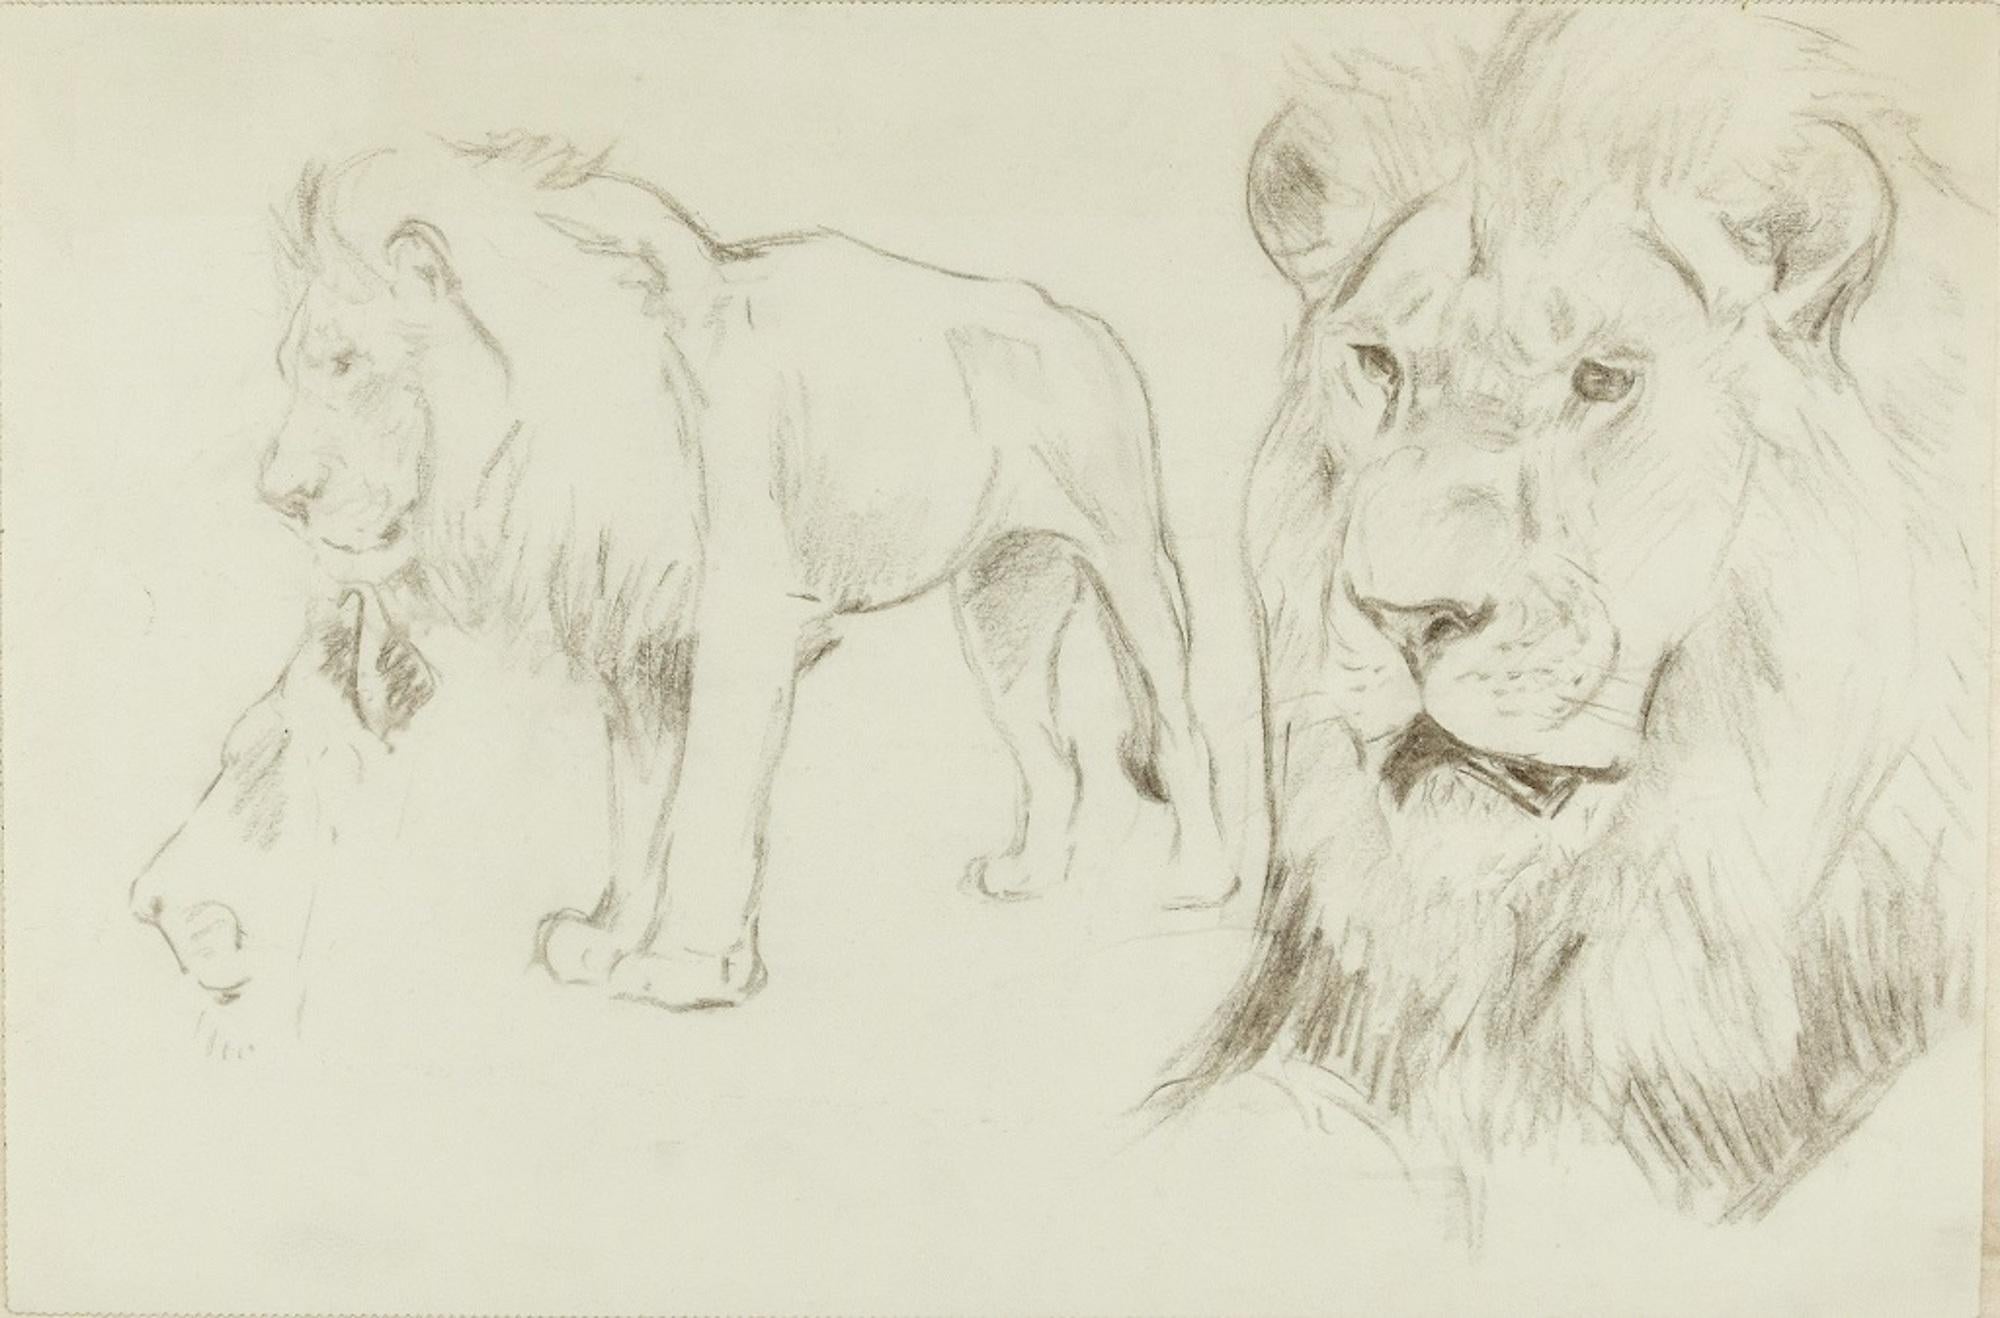 Wilhelm Lorenz Animal Art - Foreground of a Lion - Original Pencil Drawing by Willy Lorenz - 1940s